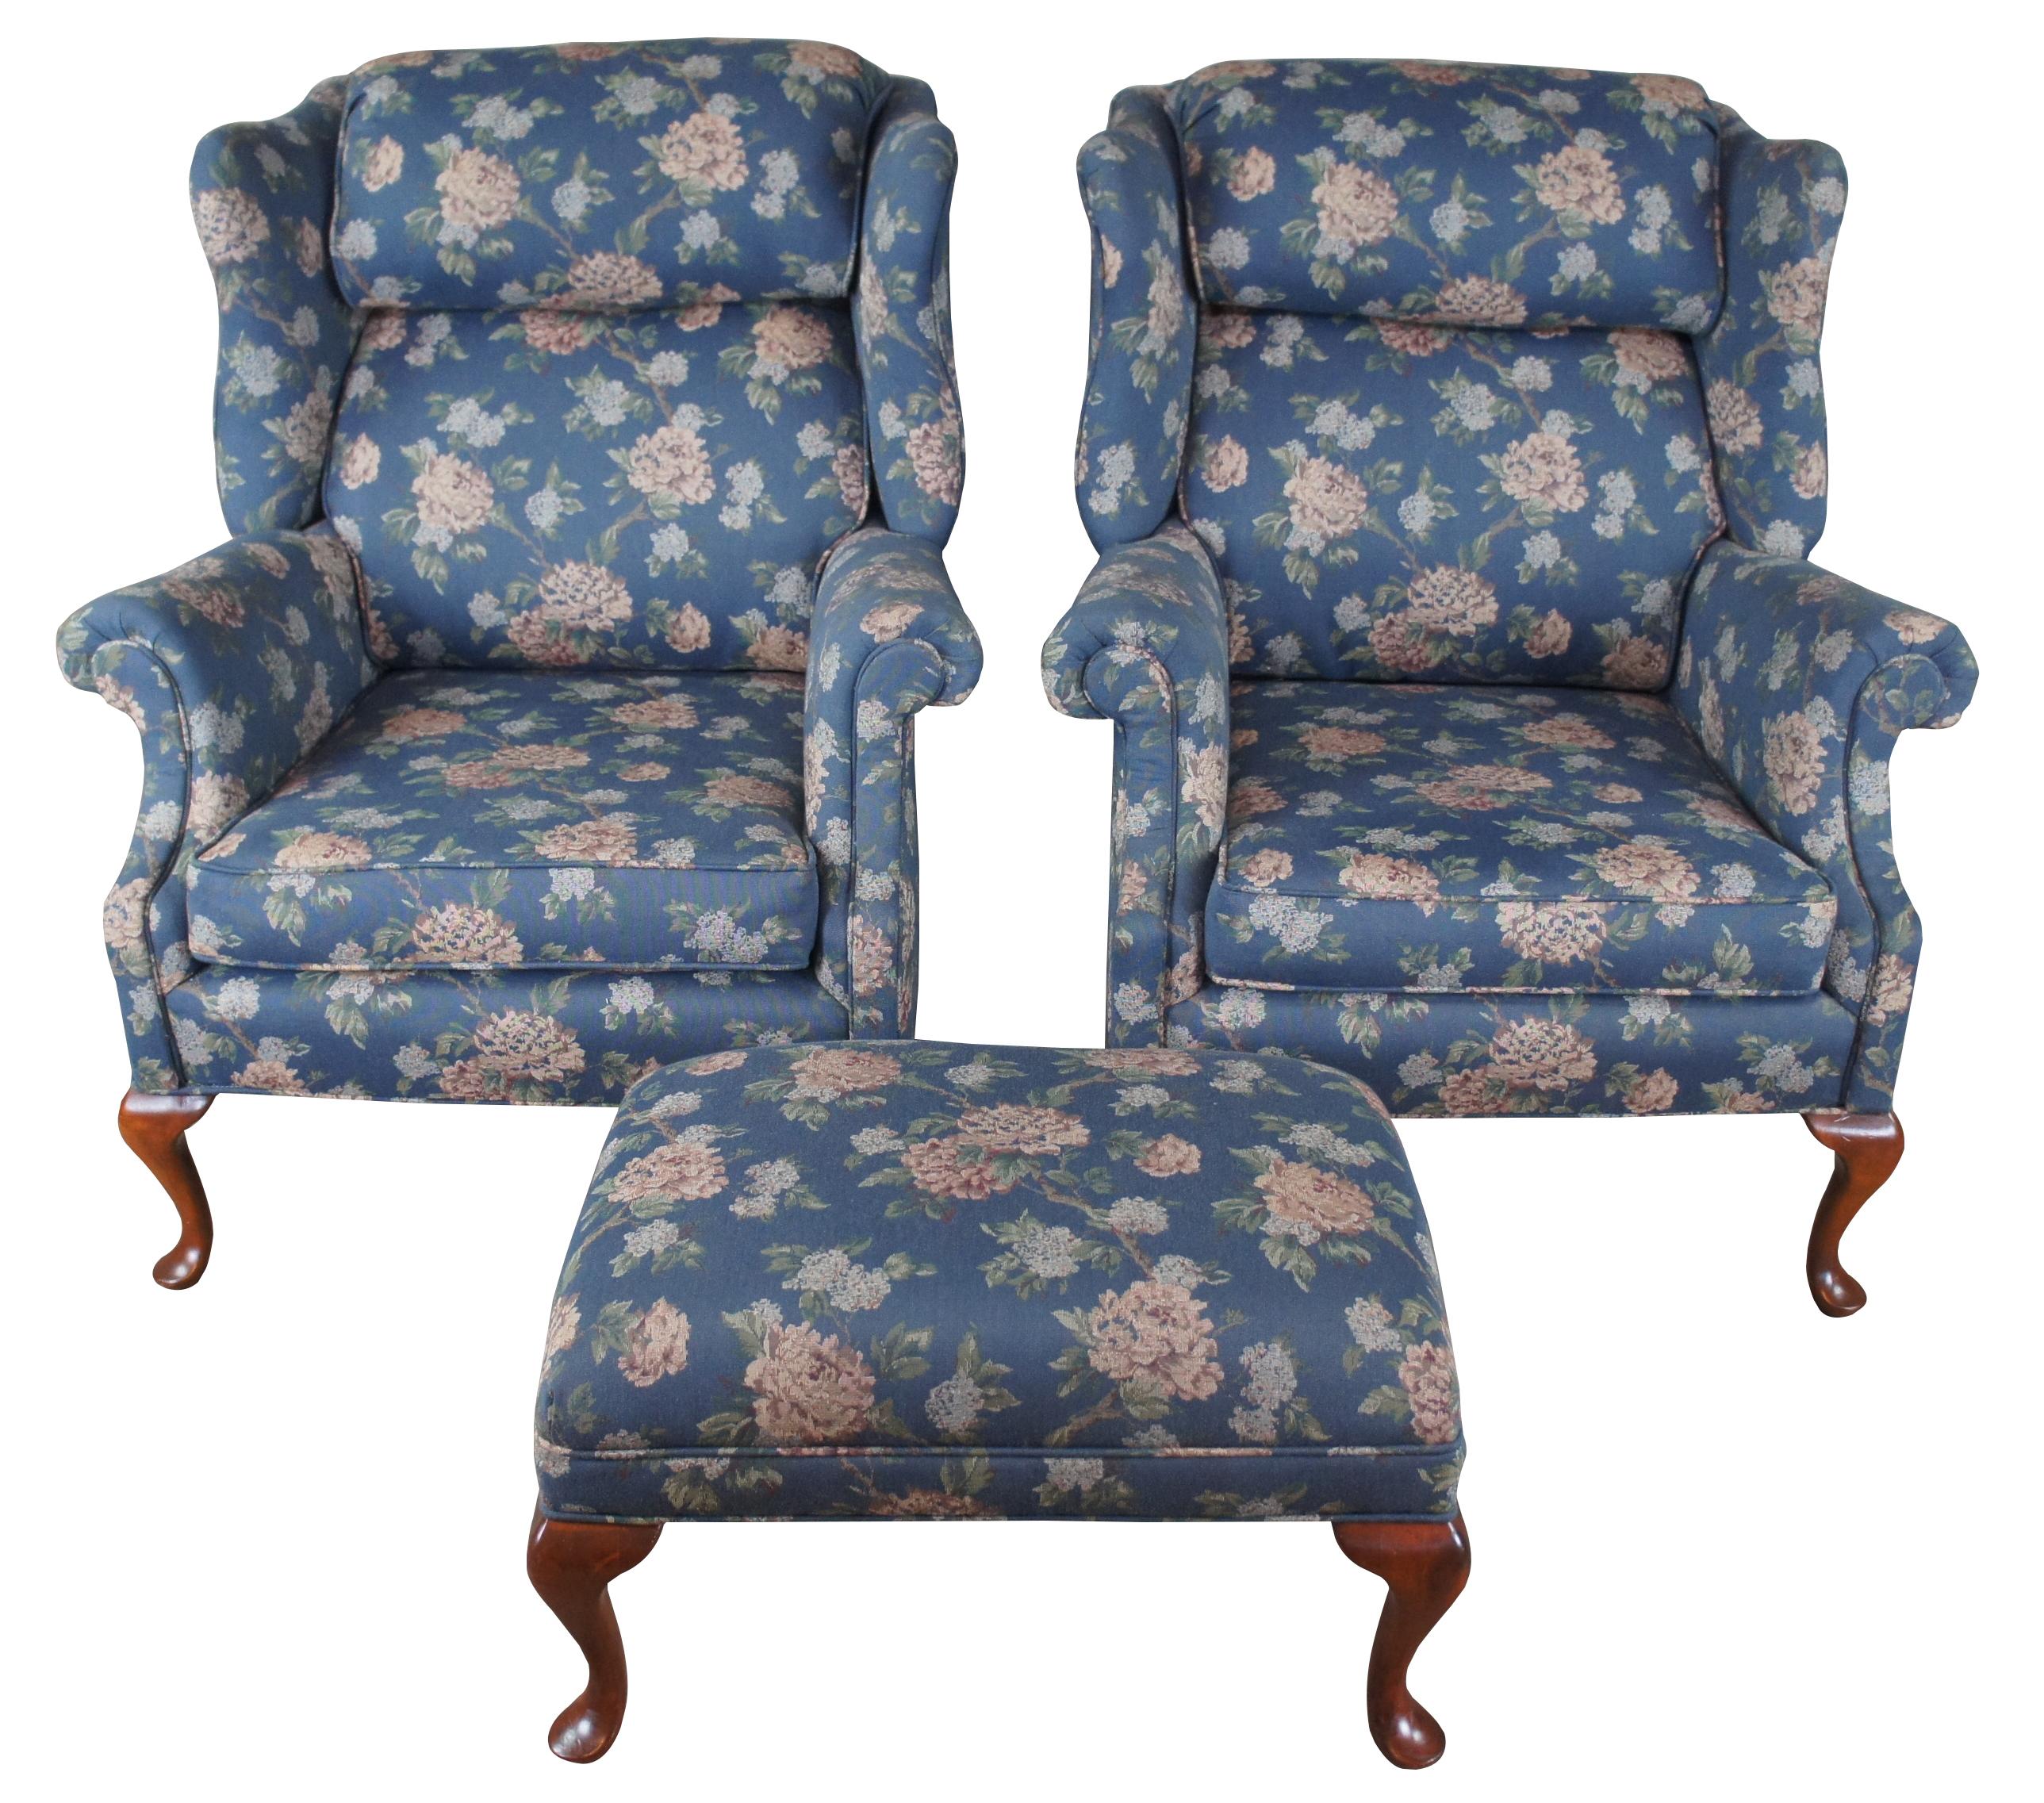 Vintage set of two wingback chairs and ottoman. Made of mahogany featuring a blue floral fabric with rolled arms, padded headdress and Queen Anne slipper feet. Custom upholstered by Shelby Upholstering & Interiors of Indianapolis.

Measures: